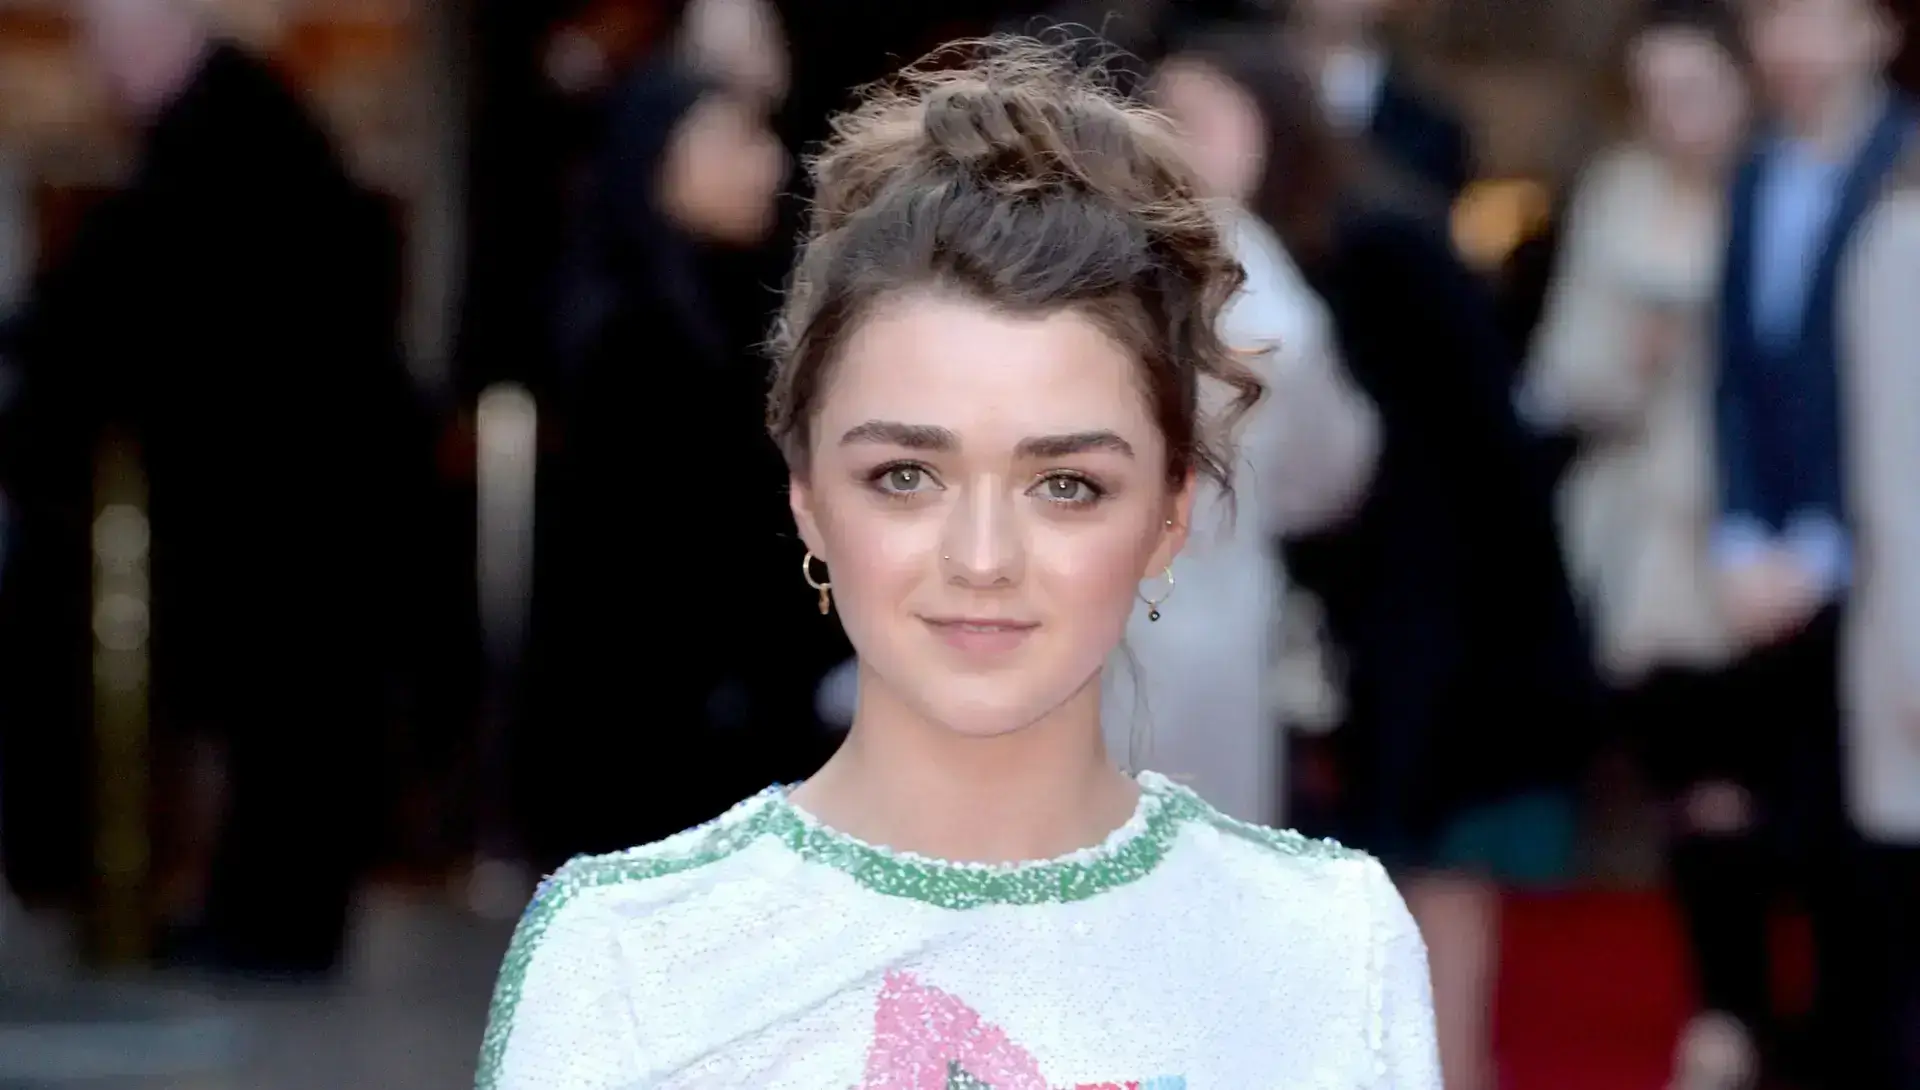 Maisie Williams Talk About Social Media On Mental Health Issues